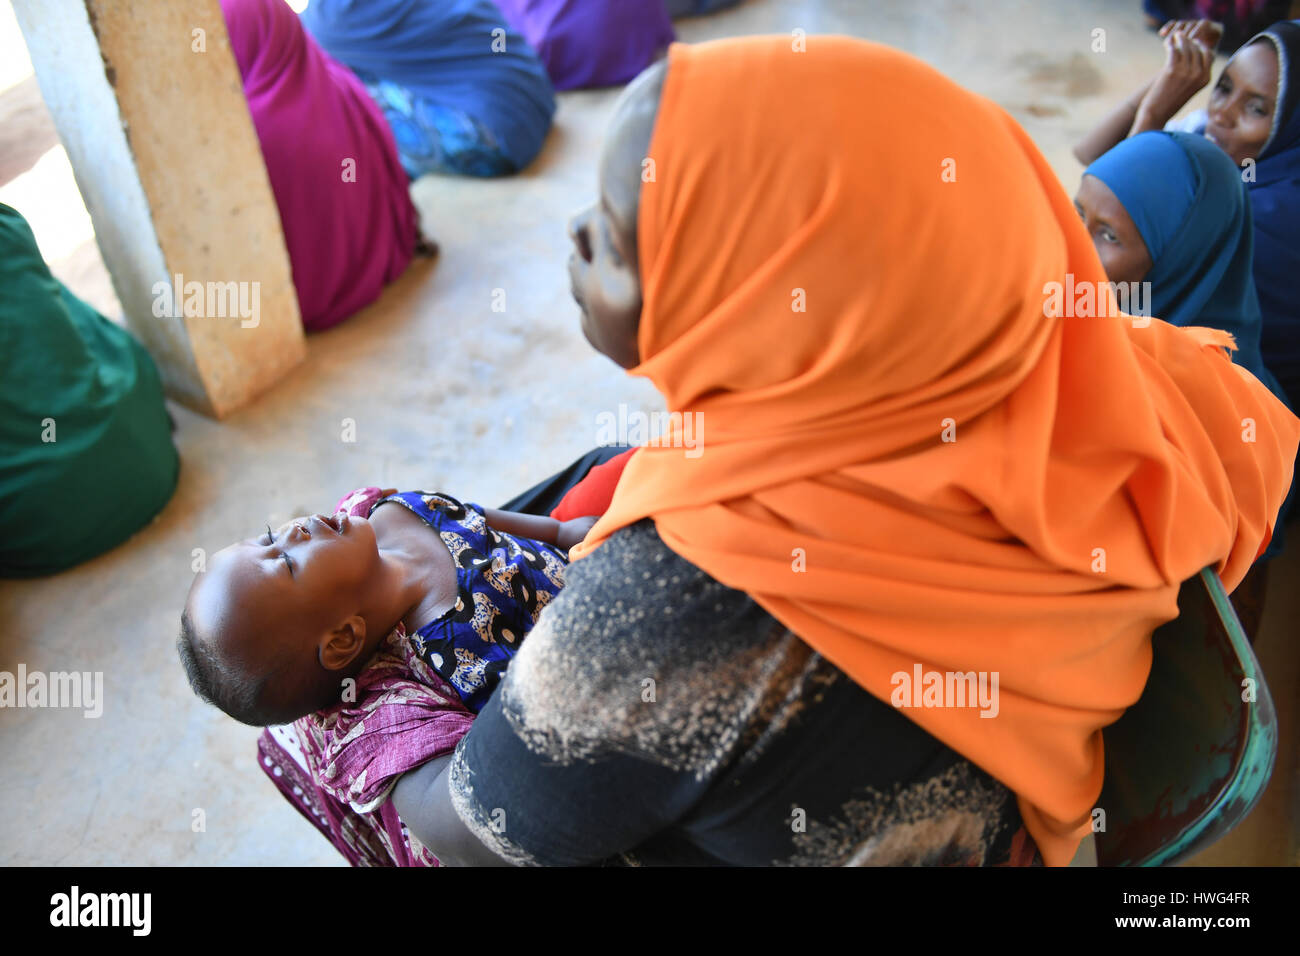 (170321) -- DOOLOW (SOMALIA), March 21, 2017 (Xinhua) -- A child sleeps in her mother's arms inside the IDP camp in Doolow, a border town with Ethiopia, in Somalia, on March 20, 2017. One out of seven Somali children dies before its fifth birthday, and acute malnutrition weakens the immune system, which makes affected children more susceptible to disease such as measles, a UN spokesman told reporters earlier this month. In Somalia, drought conditions are threatening an already fragile population battered by decades of conflict. Almost half the population are facing acute food insecurity and in Stock Photo